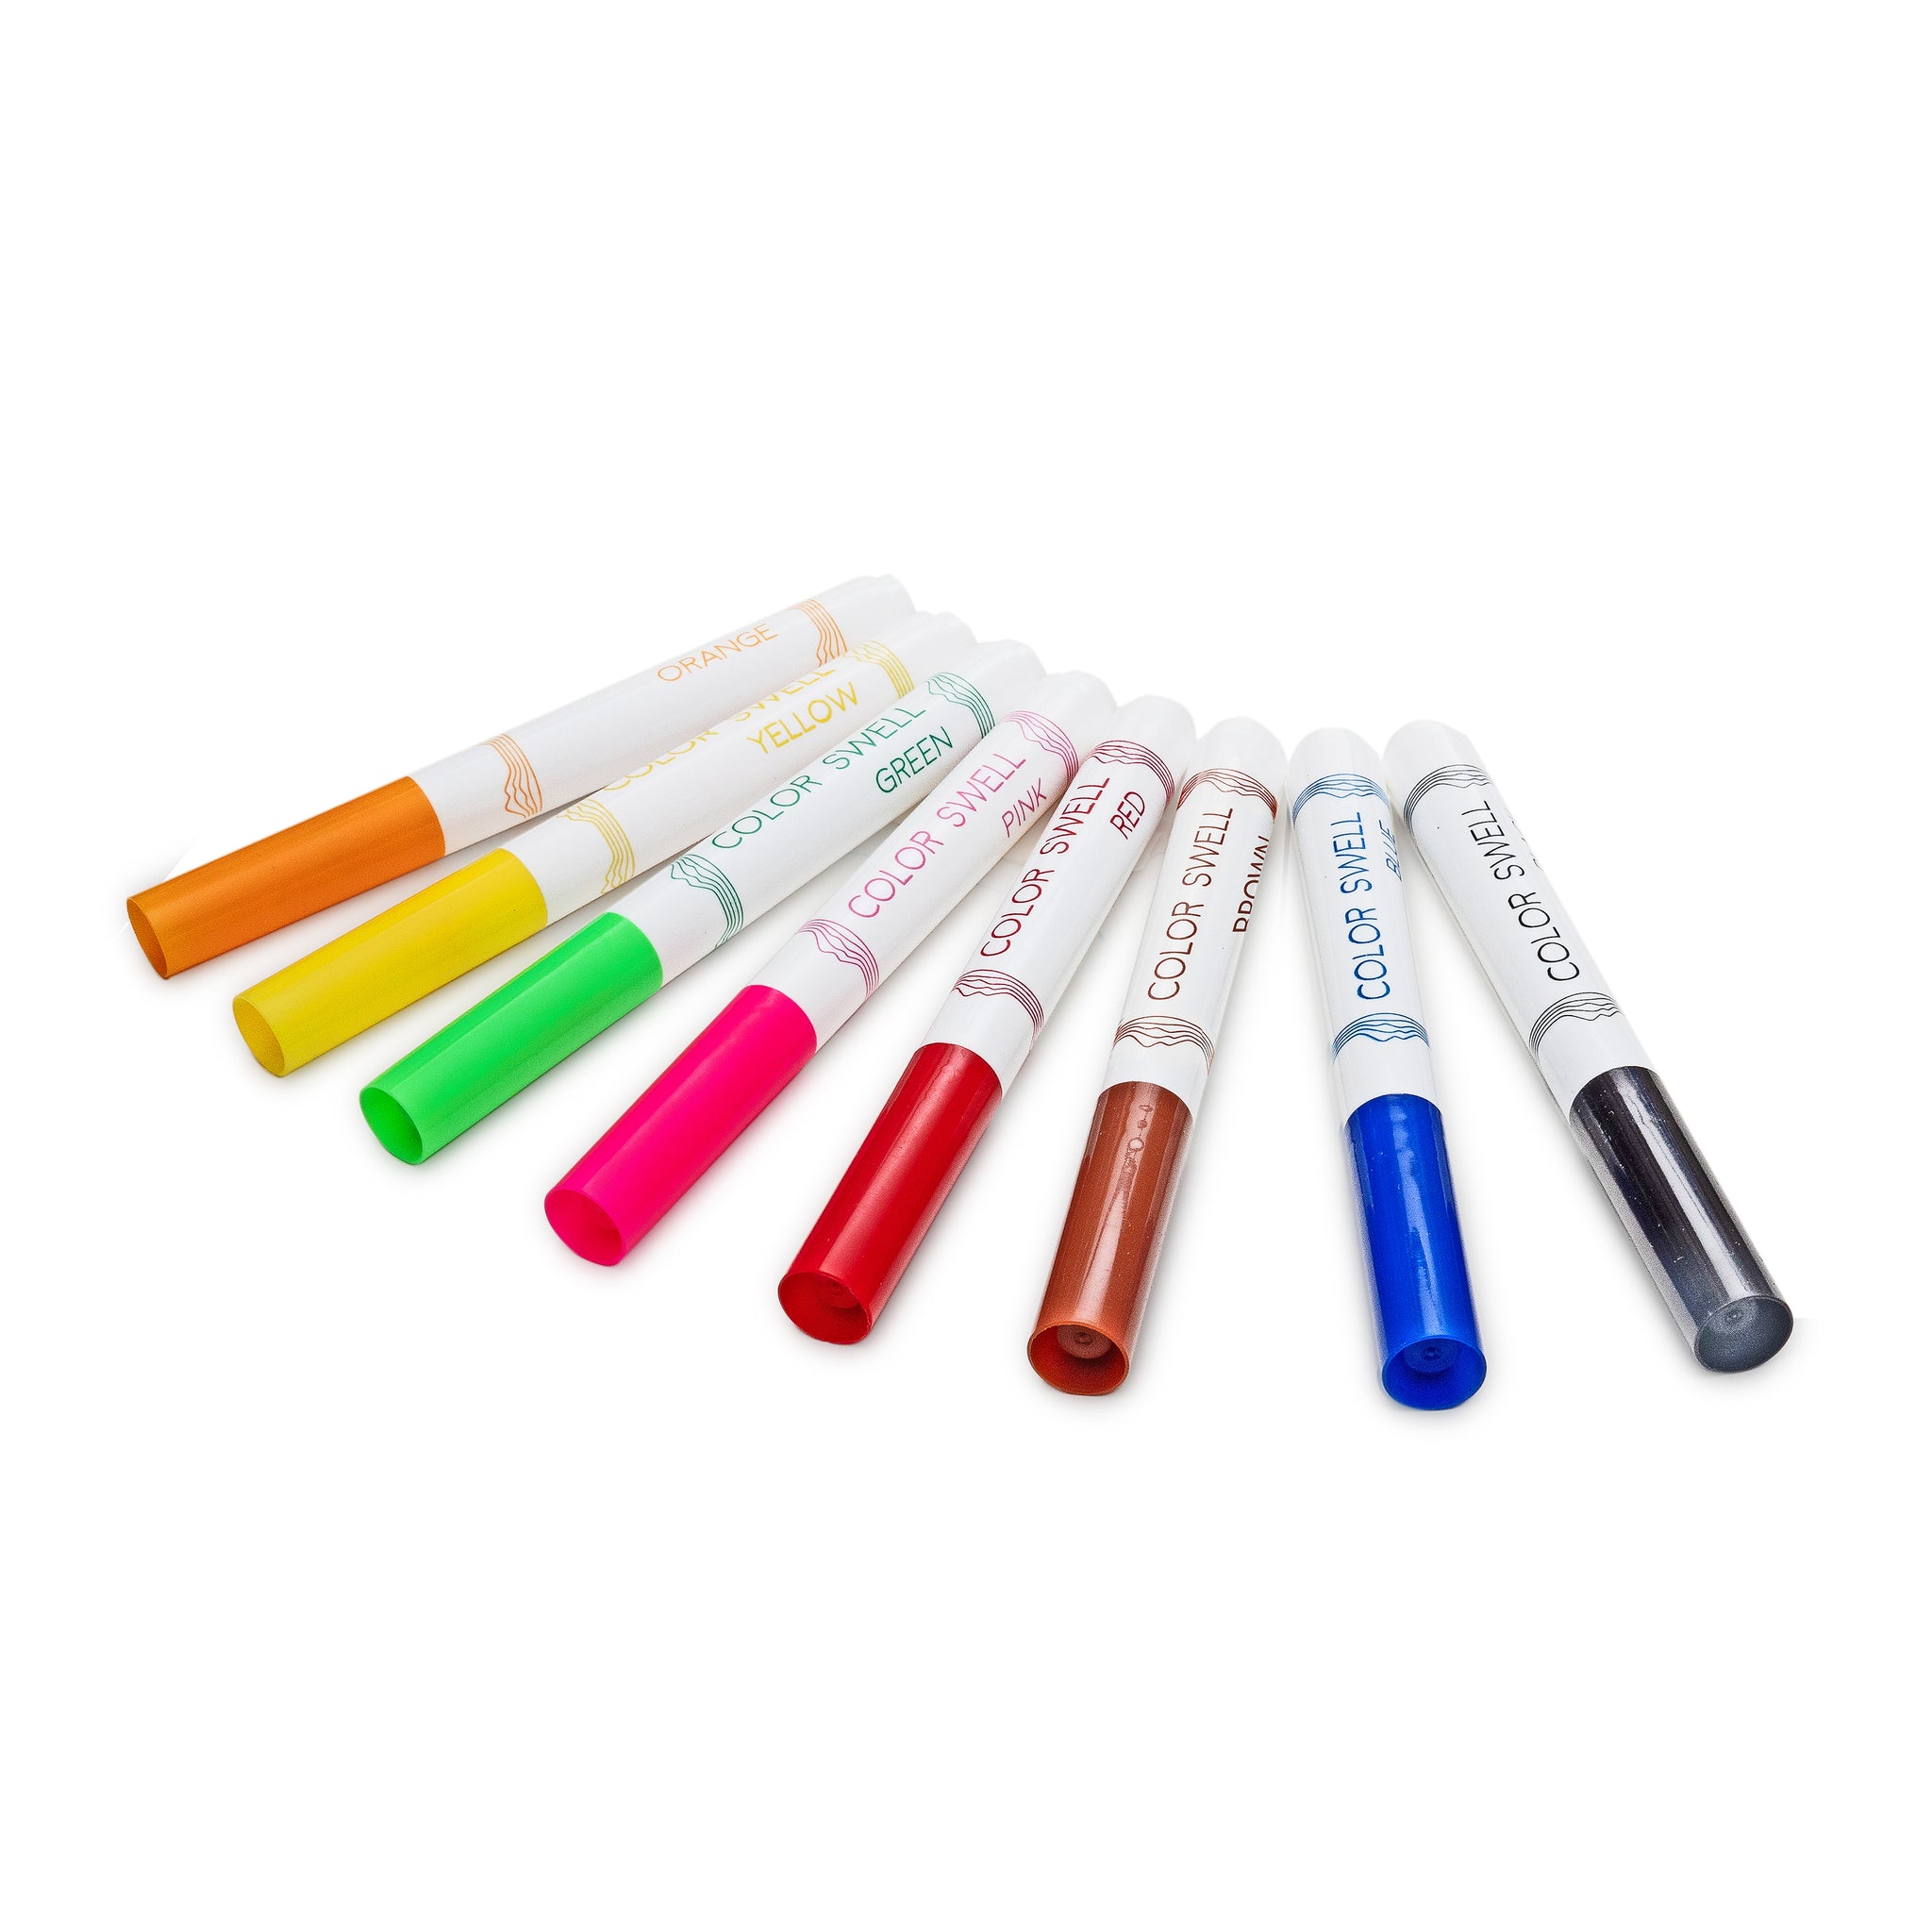 Color Swell Super Tip Washable Markers Bulk Pack 10 Boxes of 8 Vibrant Colors (80 Total)